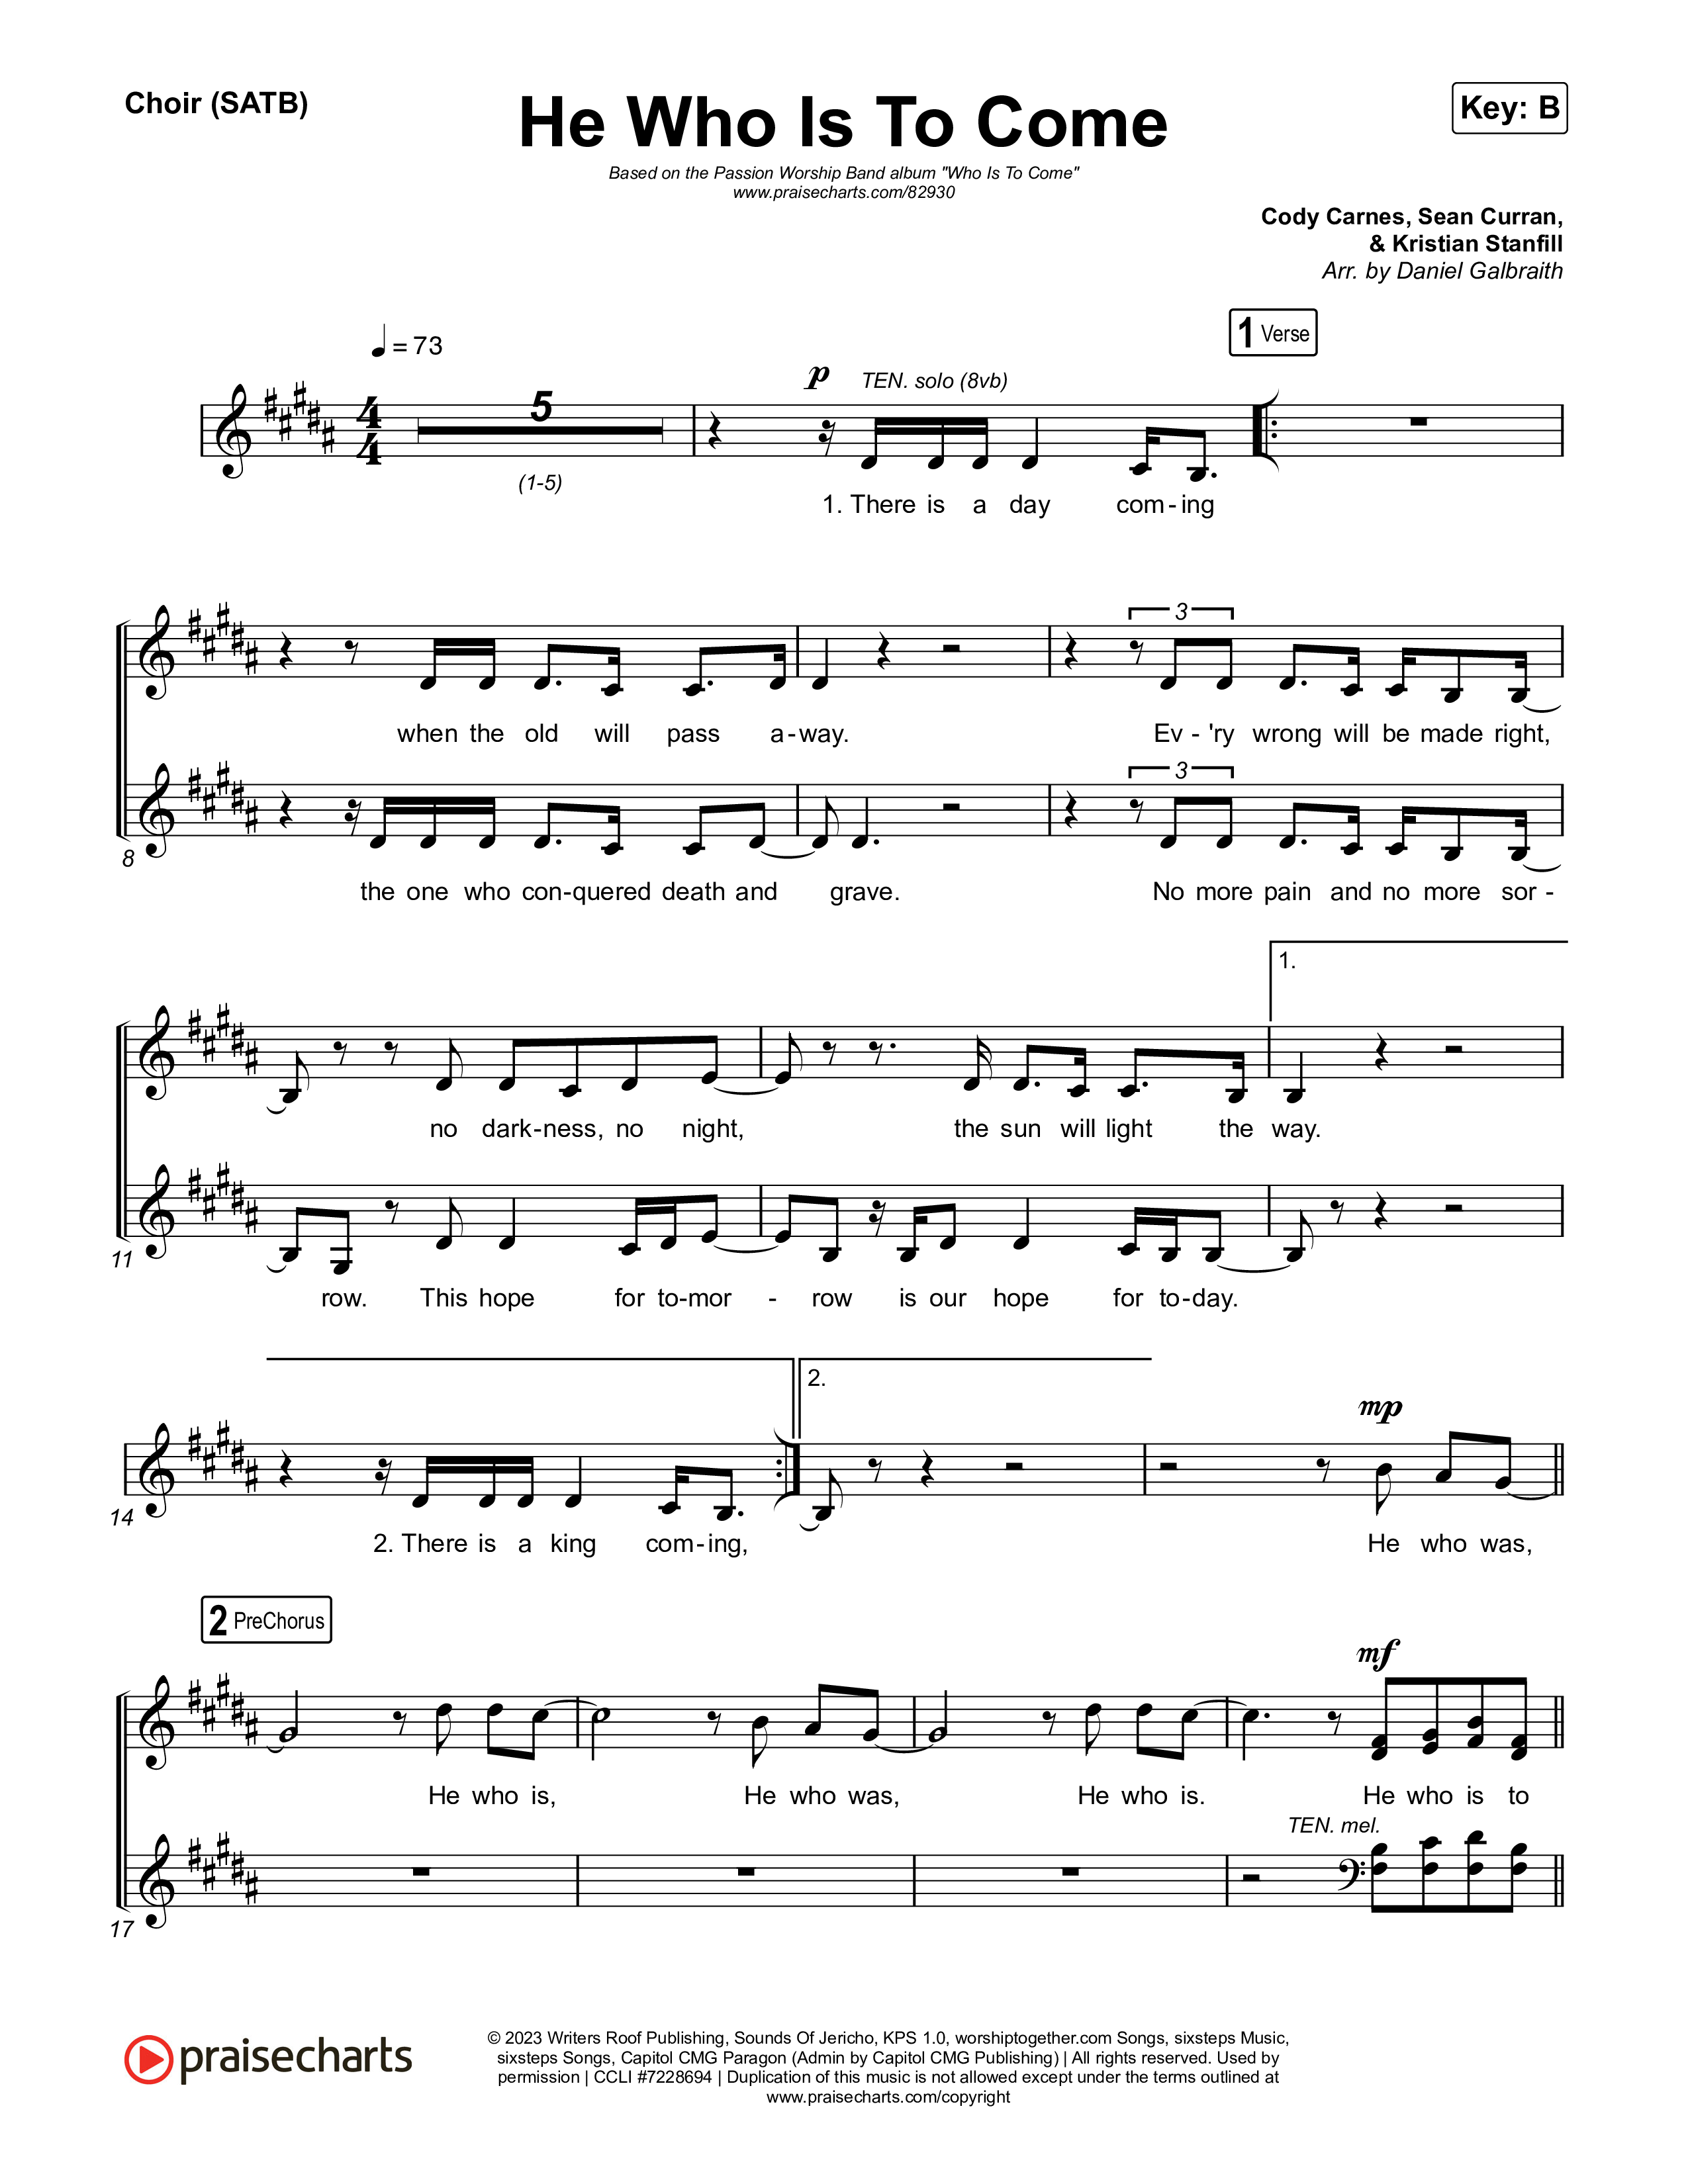 He Who Is To Come Choir Sheet (SATB) (Passion / Cody Carnes / Kristian Stanfill)